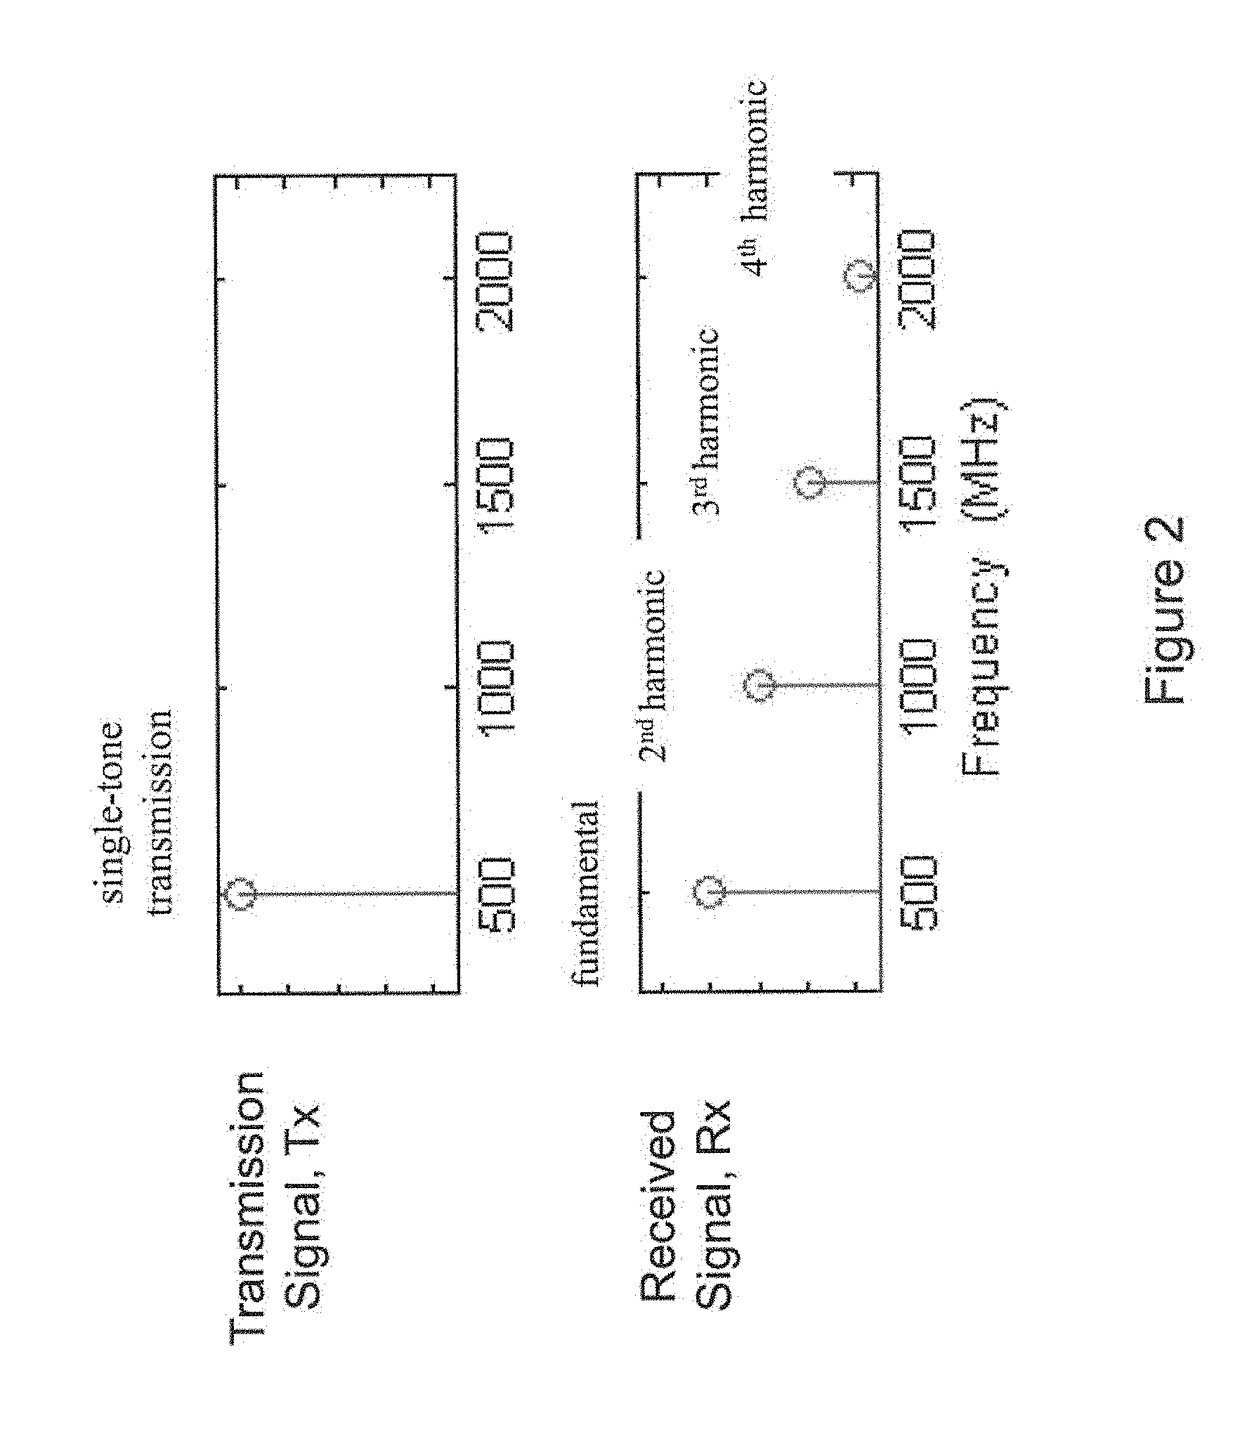 Methods and systems for locating targets using non linear radar with a matched filter which uses exponential value of the transmit signal